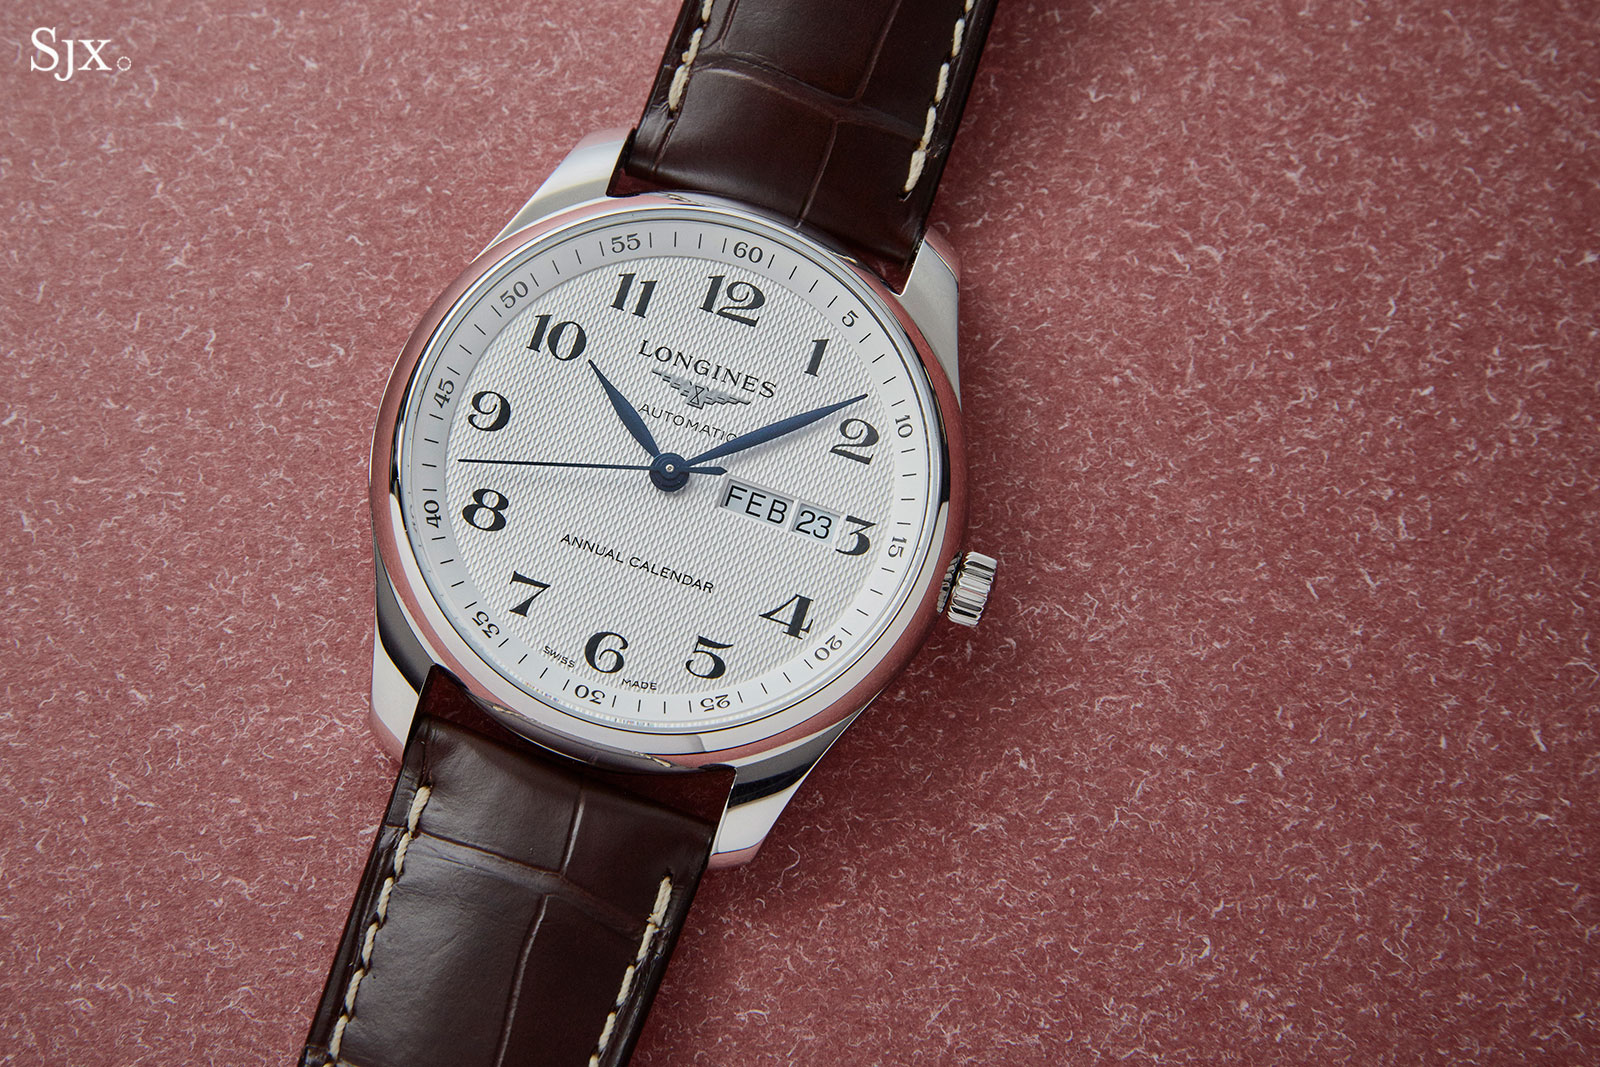 Hands On with the Longines Master Collection Annual Calendar SJX Watches